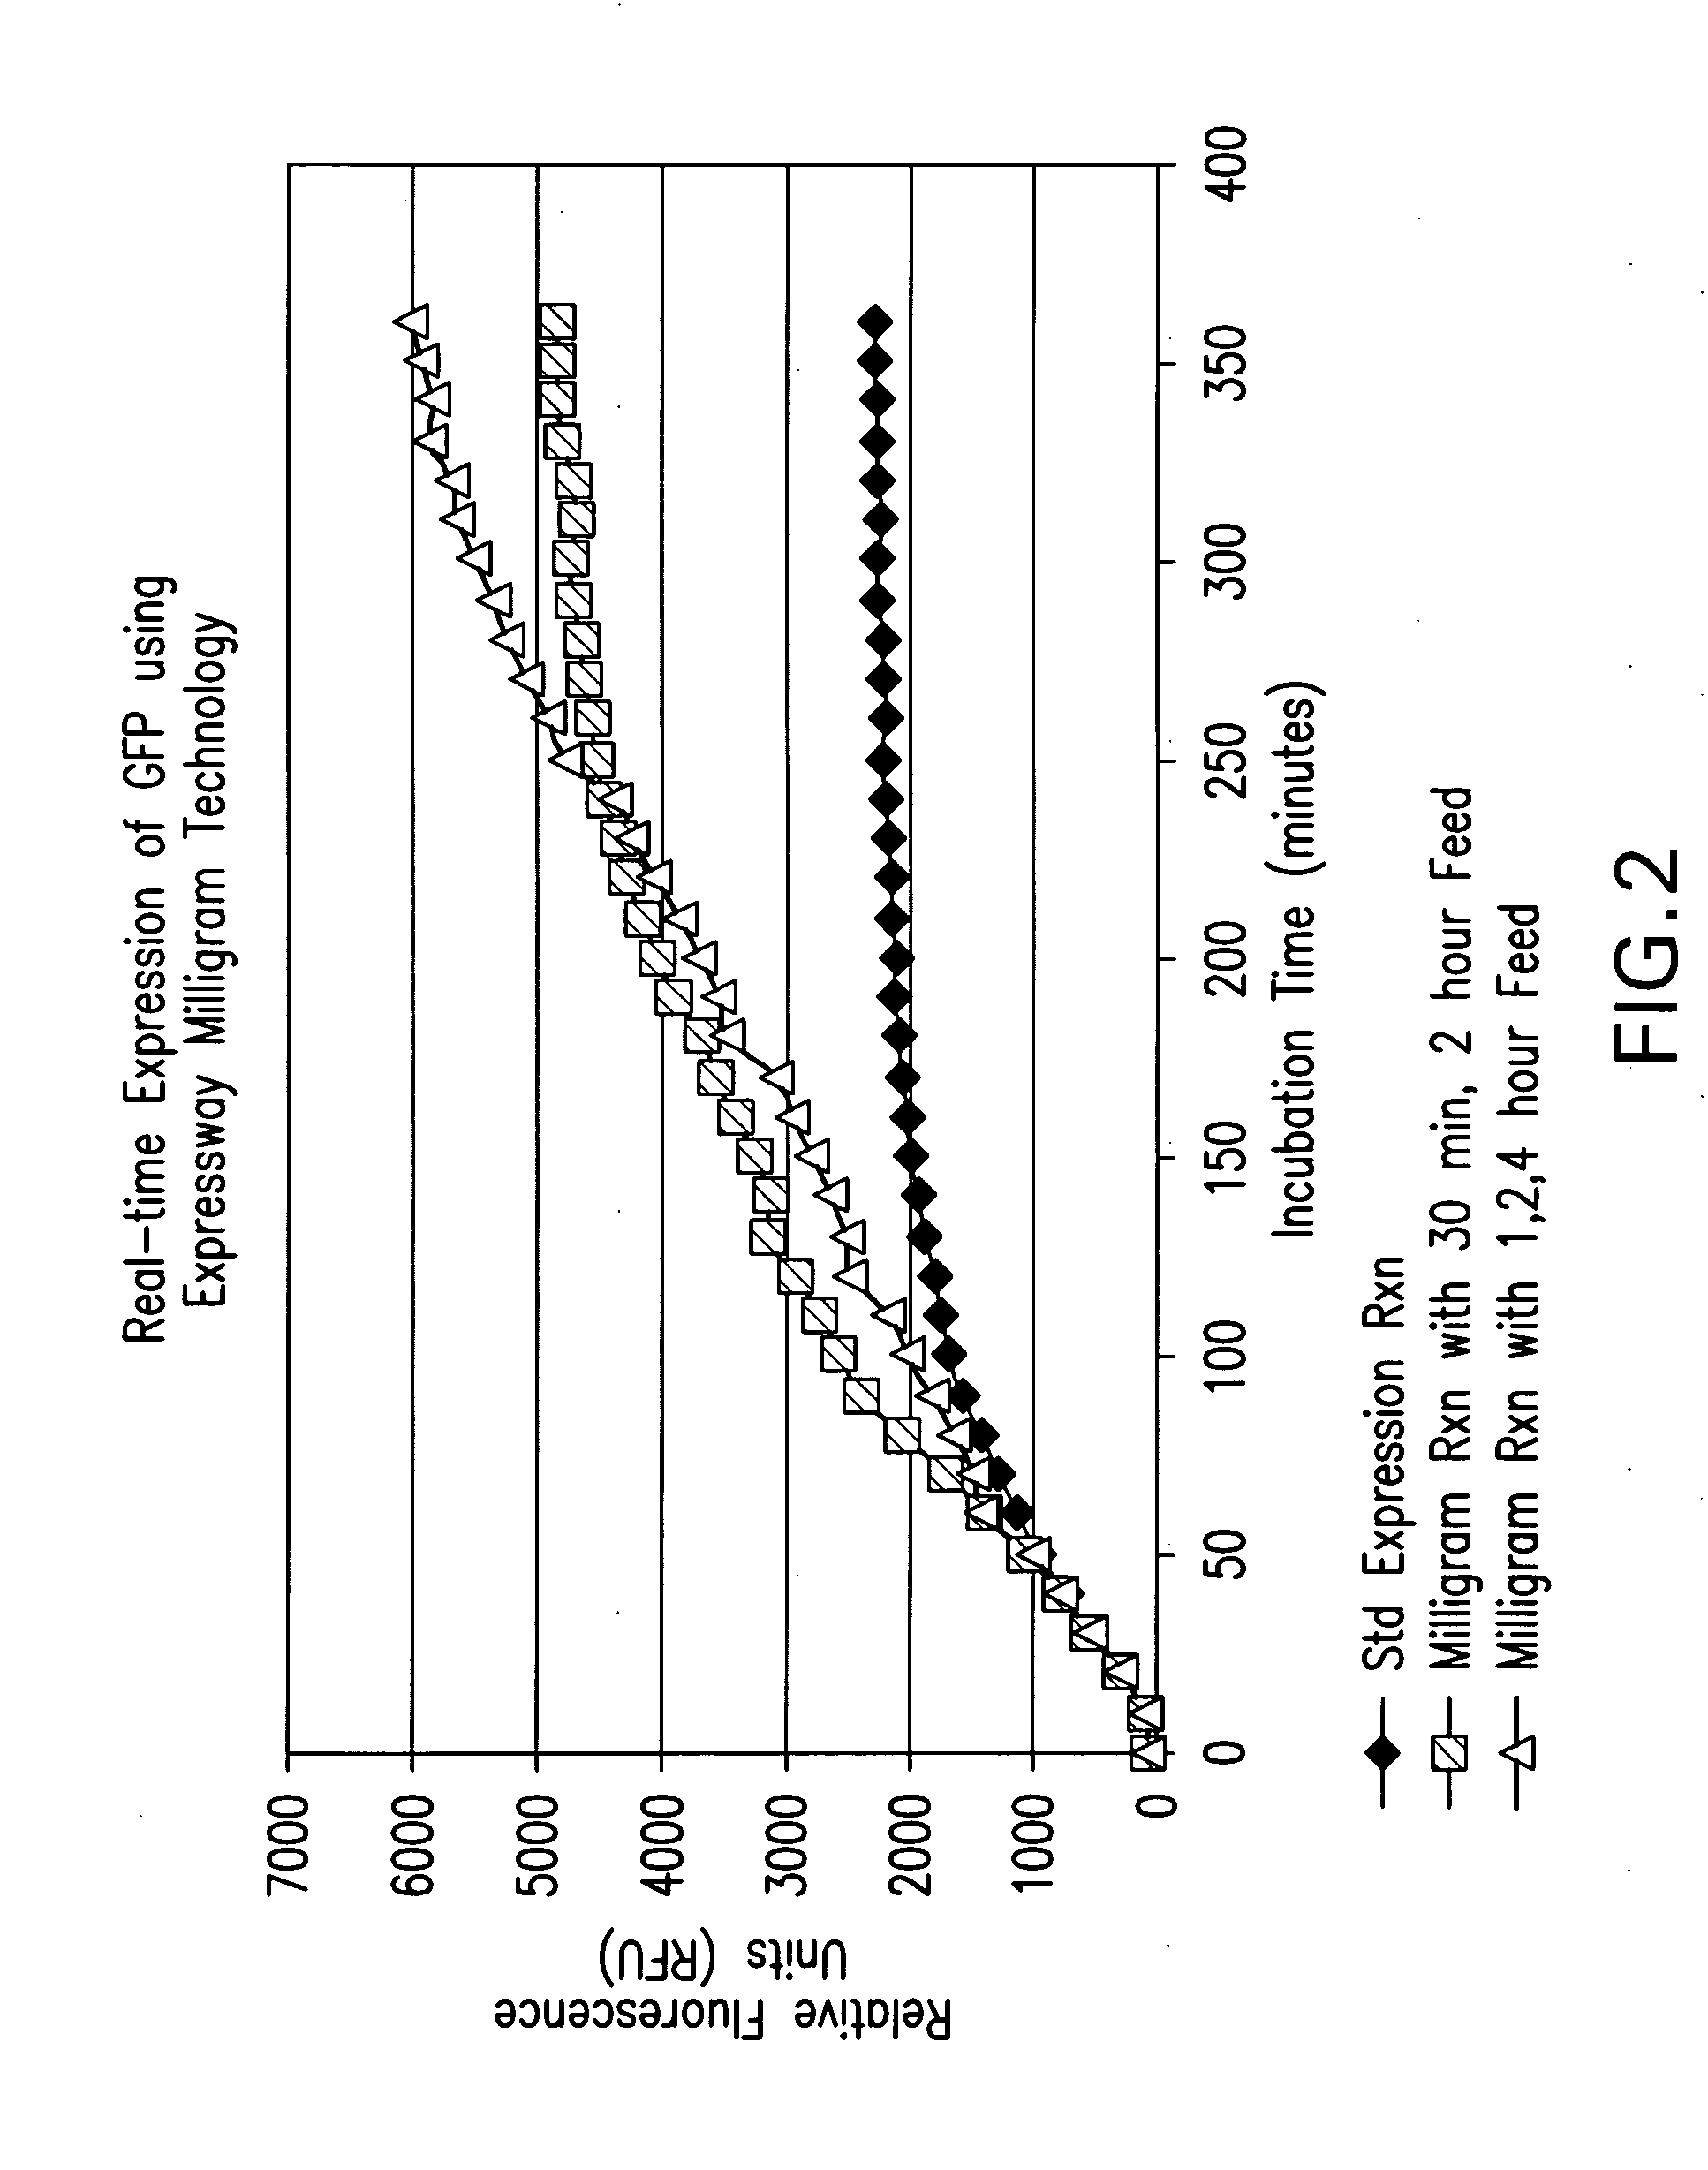 Feeding buffers, systems, and methods for in vitro synthesis of biomolecules